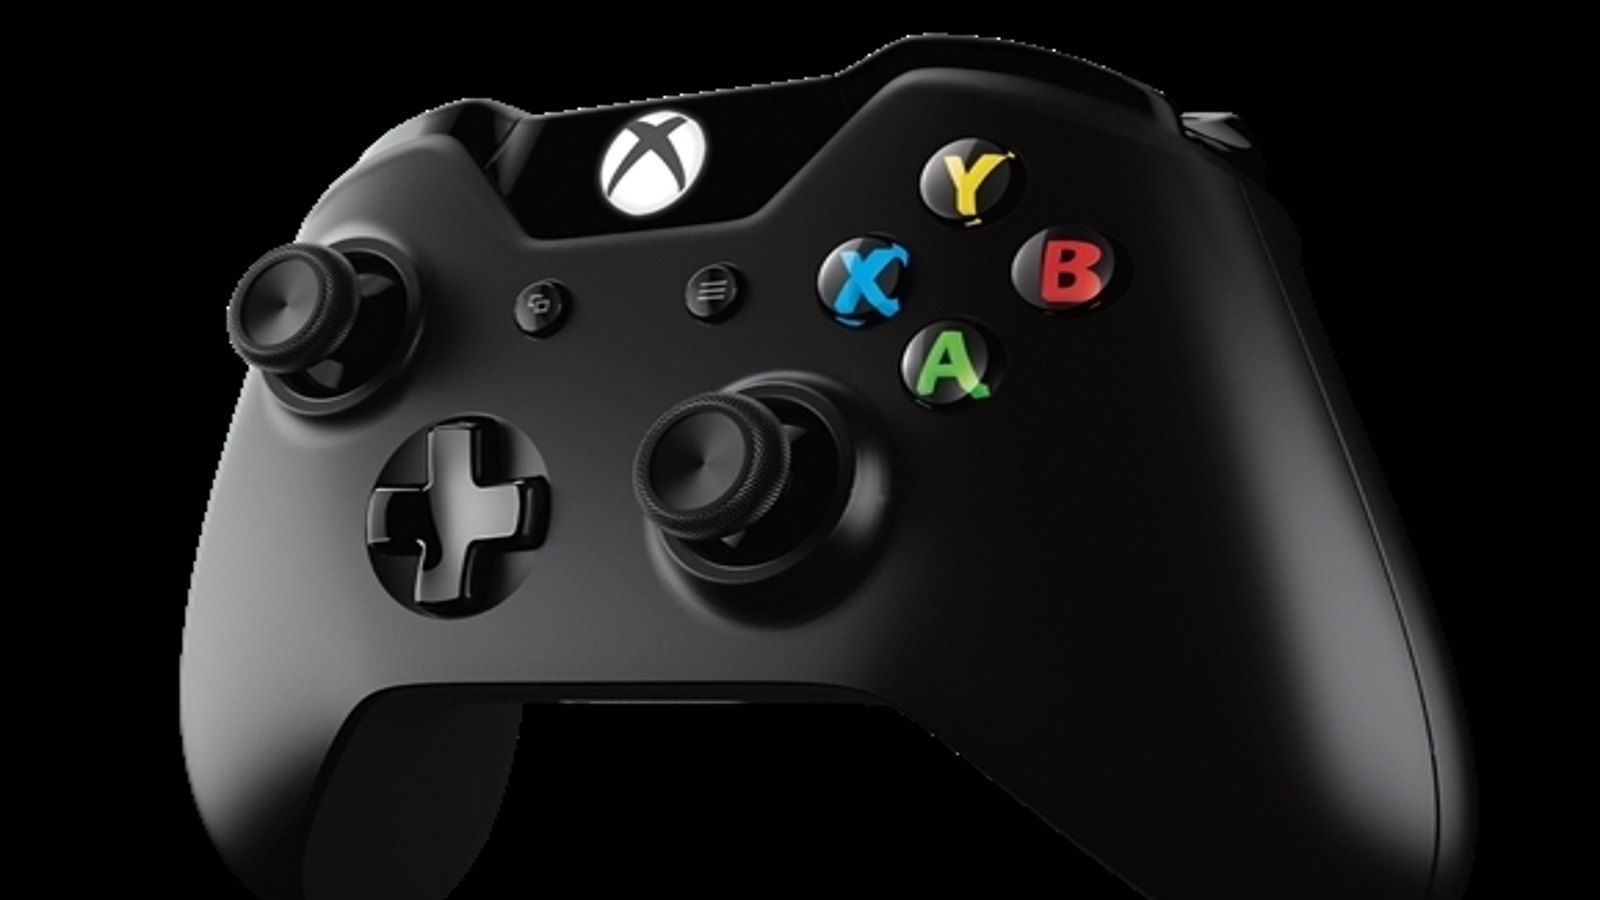 Microsoft wants to build bridges, some Xbox gamers want to burn them  instead